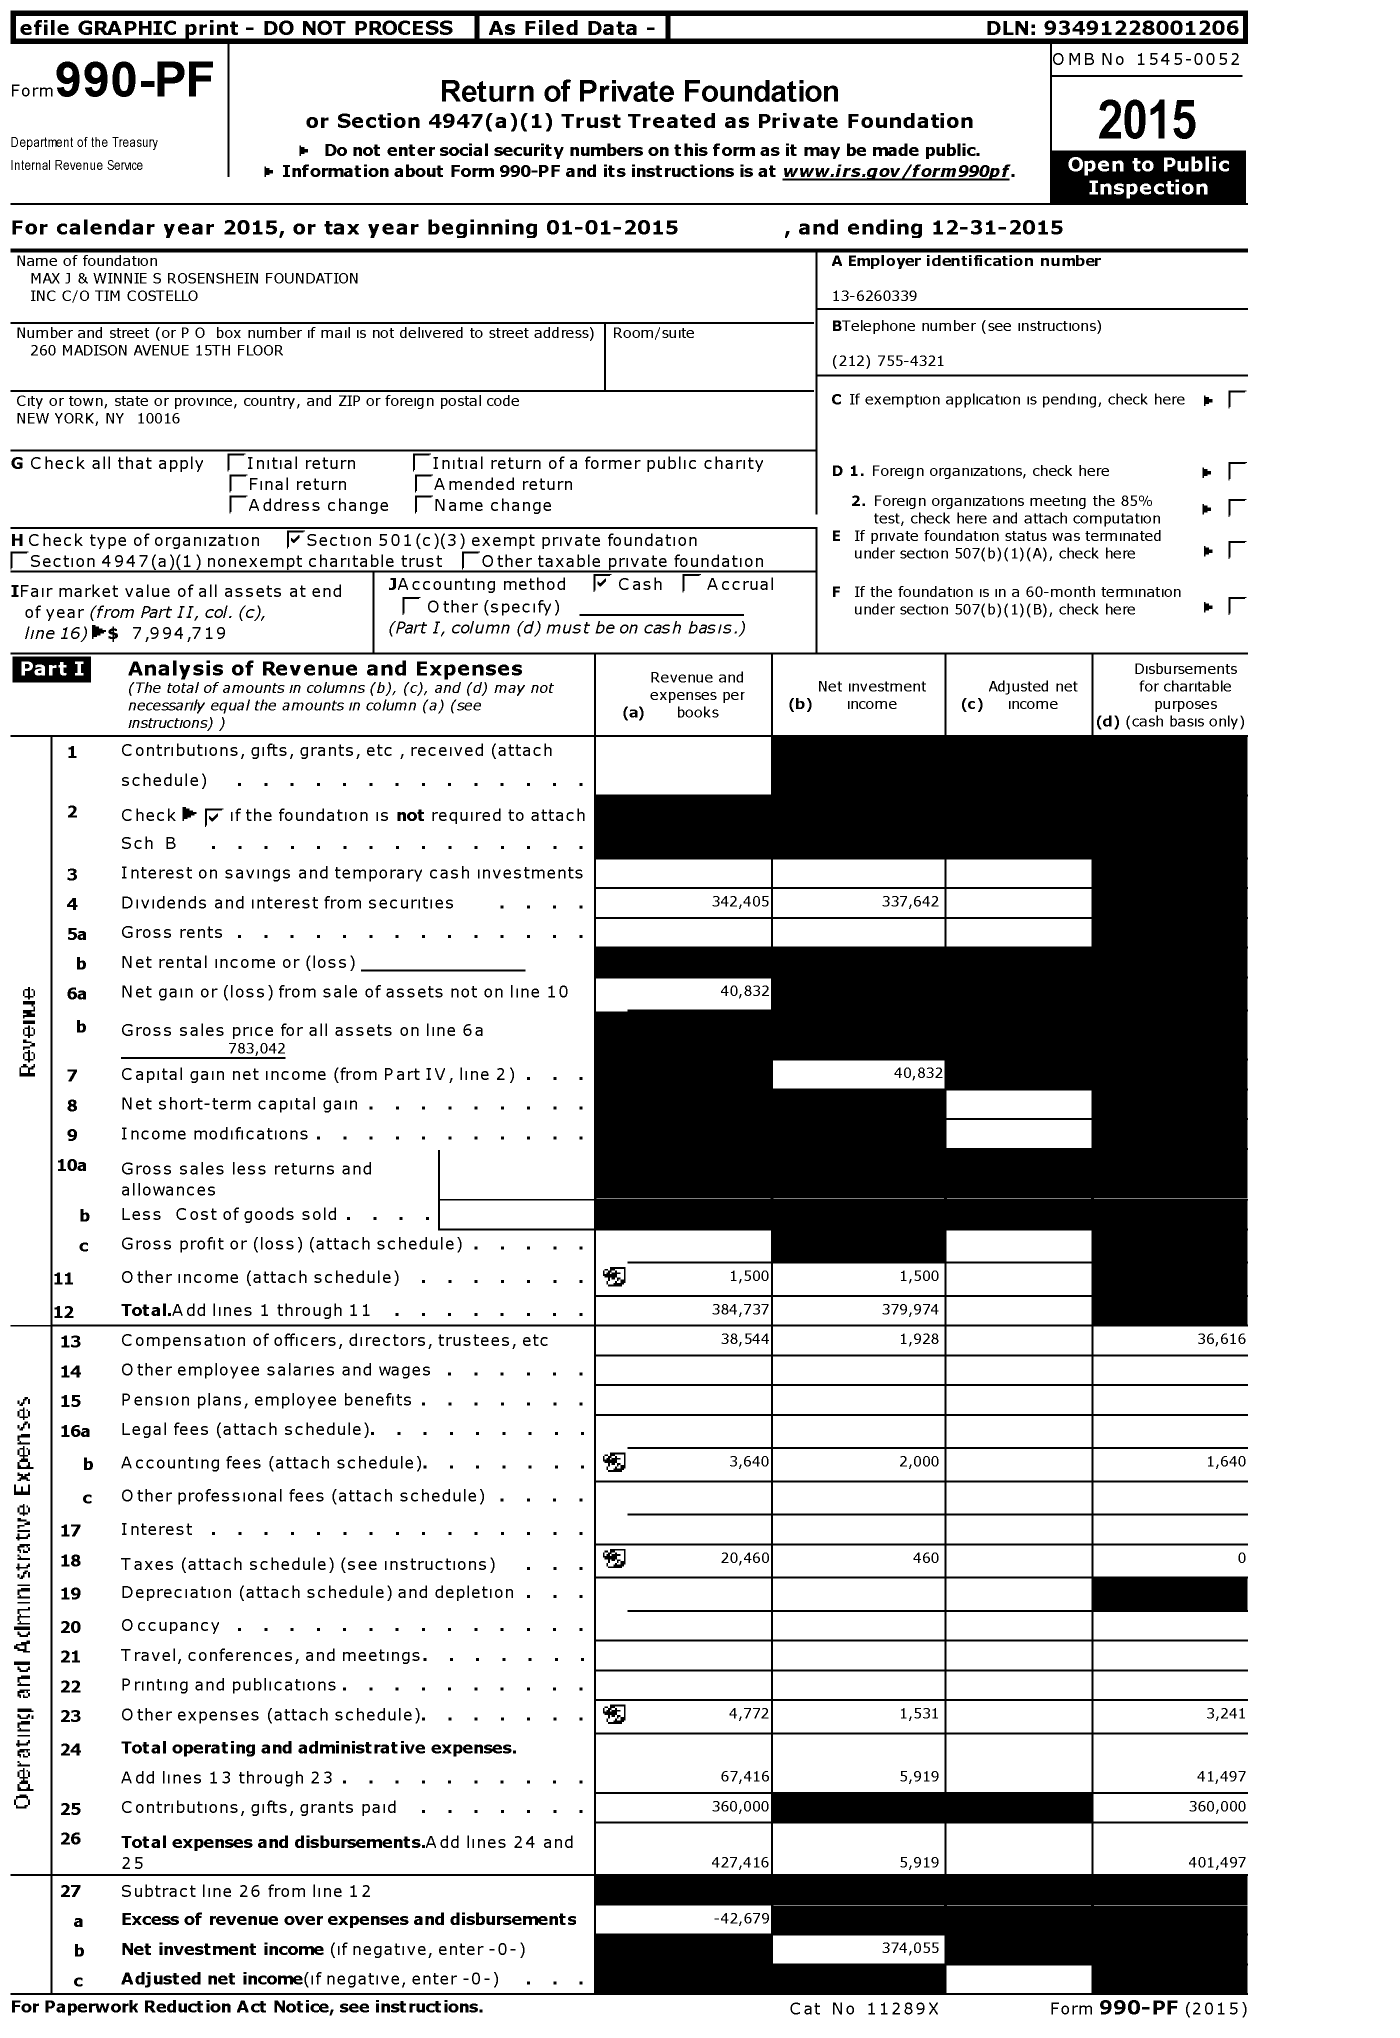 Image of first page of 2015 Form 990PF for Max J and Winnie S Rosenshein Foundation